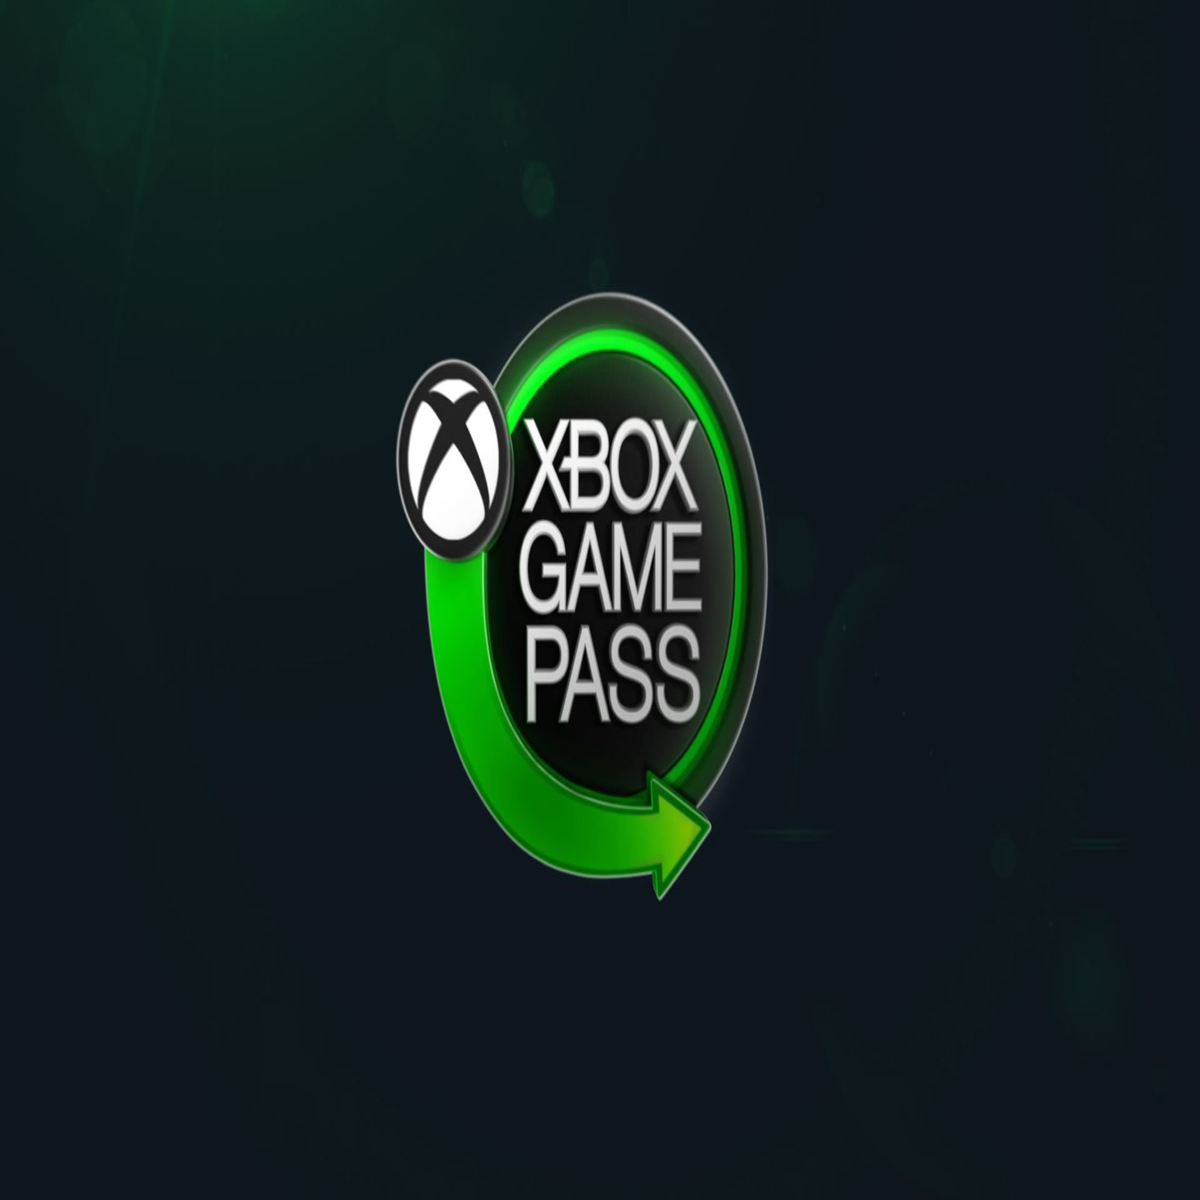 Xbox Boss: There Are 'No Plans' To Put Game Pass On PlayStation & Nintendo